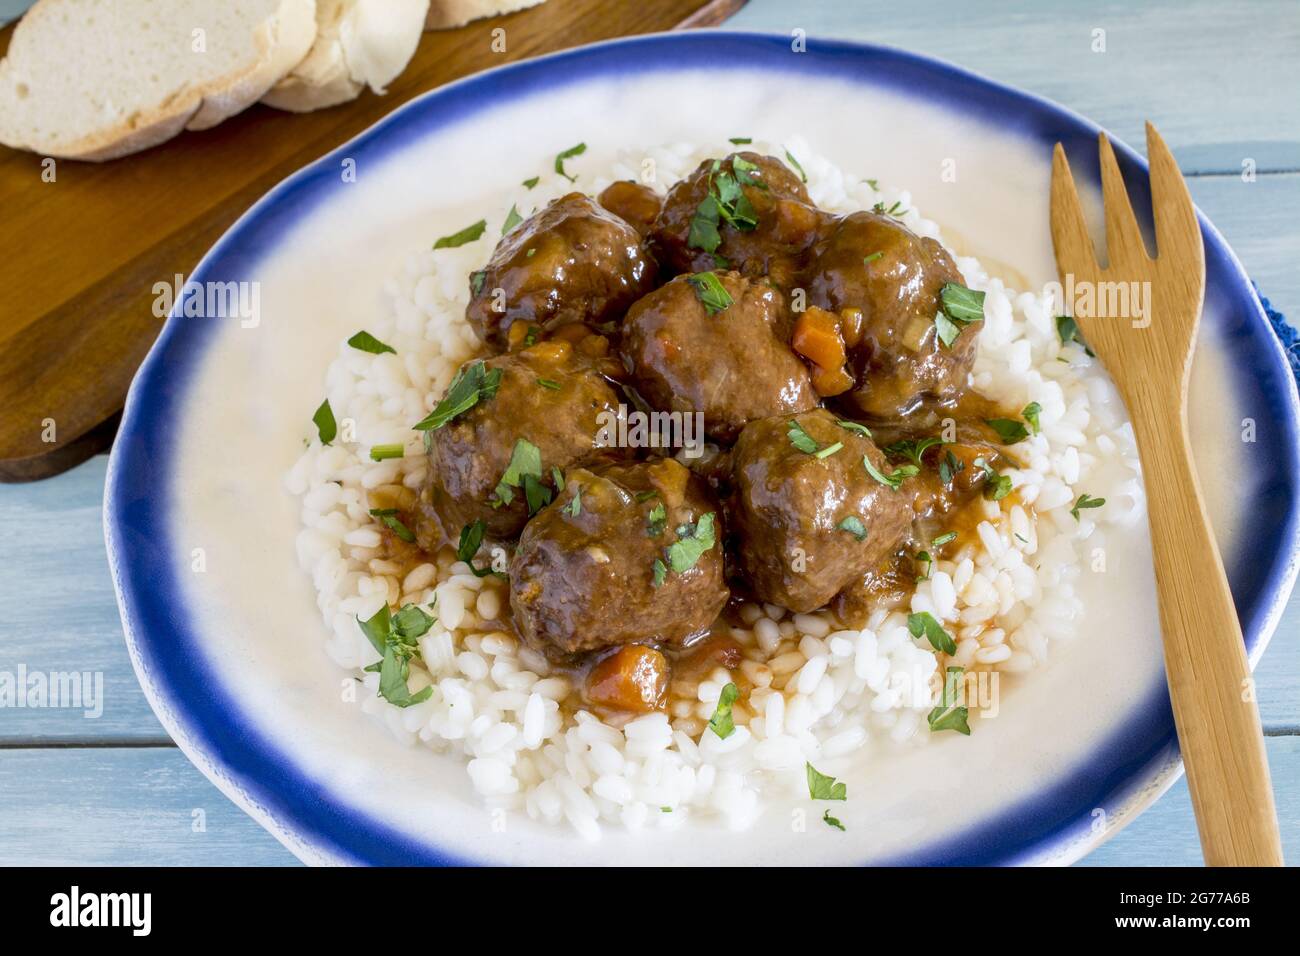 Closeup image of rice with saucy meat and greens on top in the  plate and a wooden fork on it Stock Photo